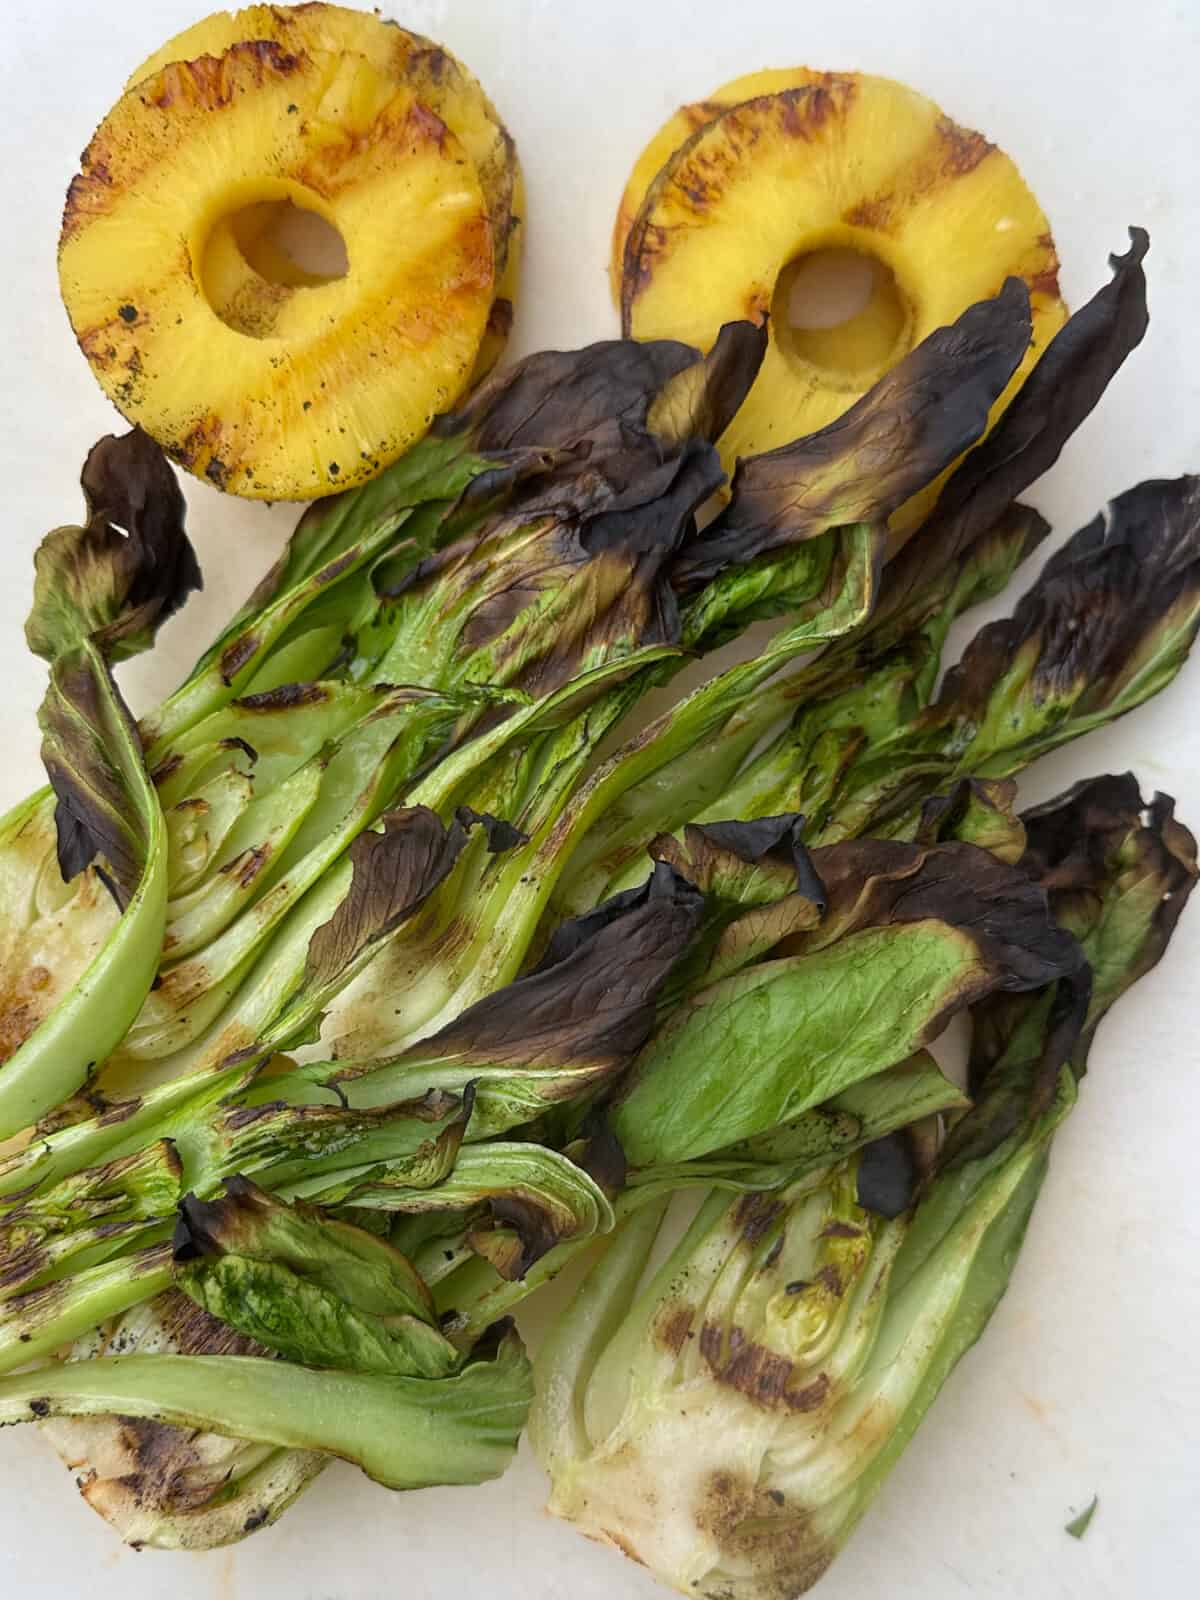 Grilled baby bok choy and pineapple slices.